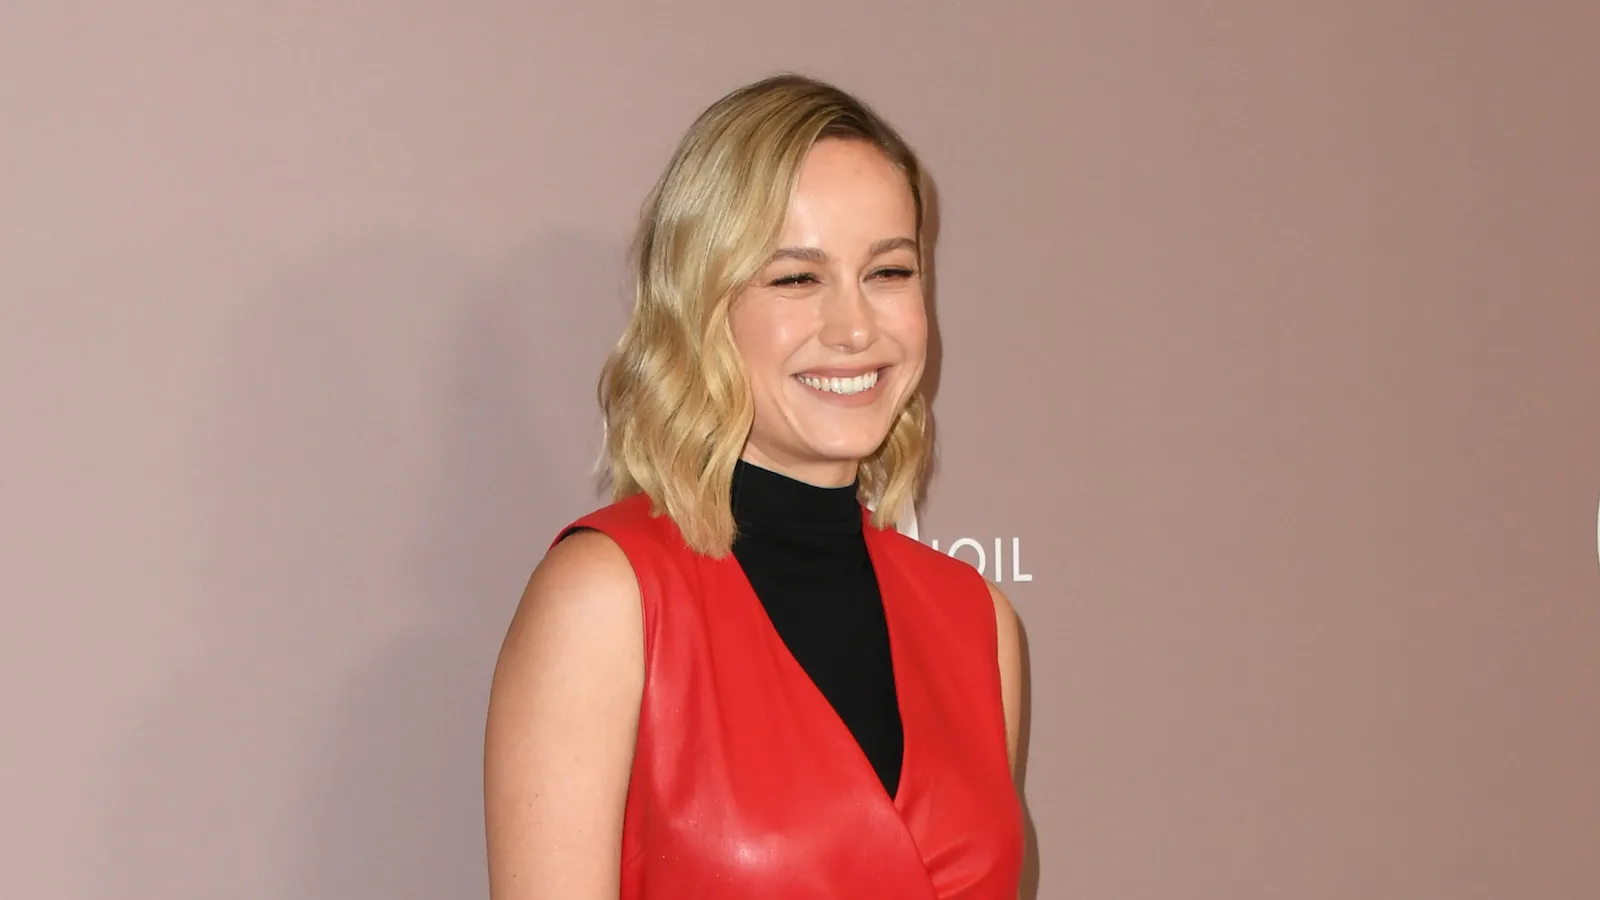 Brie Larson’s dancing in her bikini again, and wants you to help her with song choice